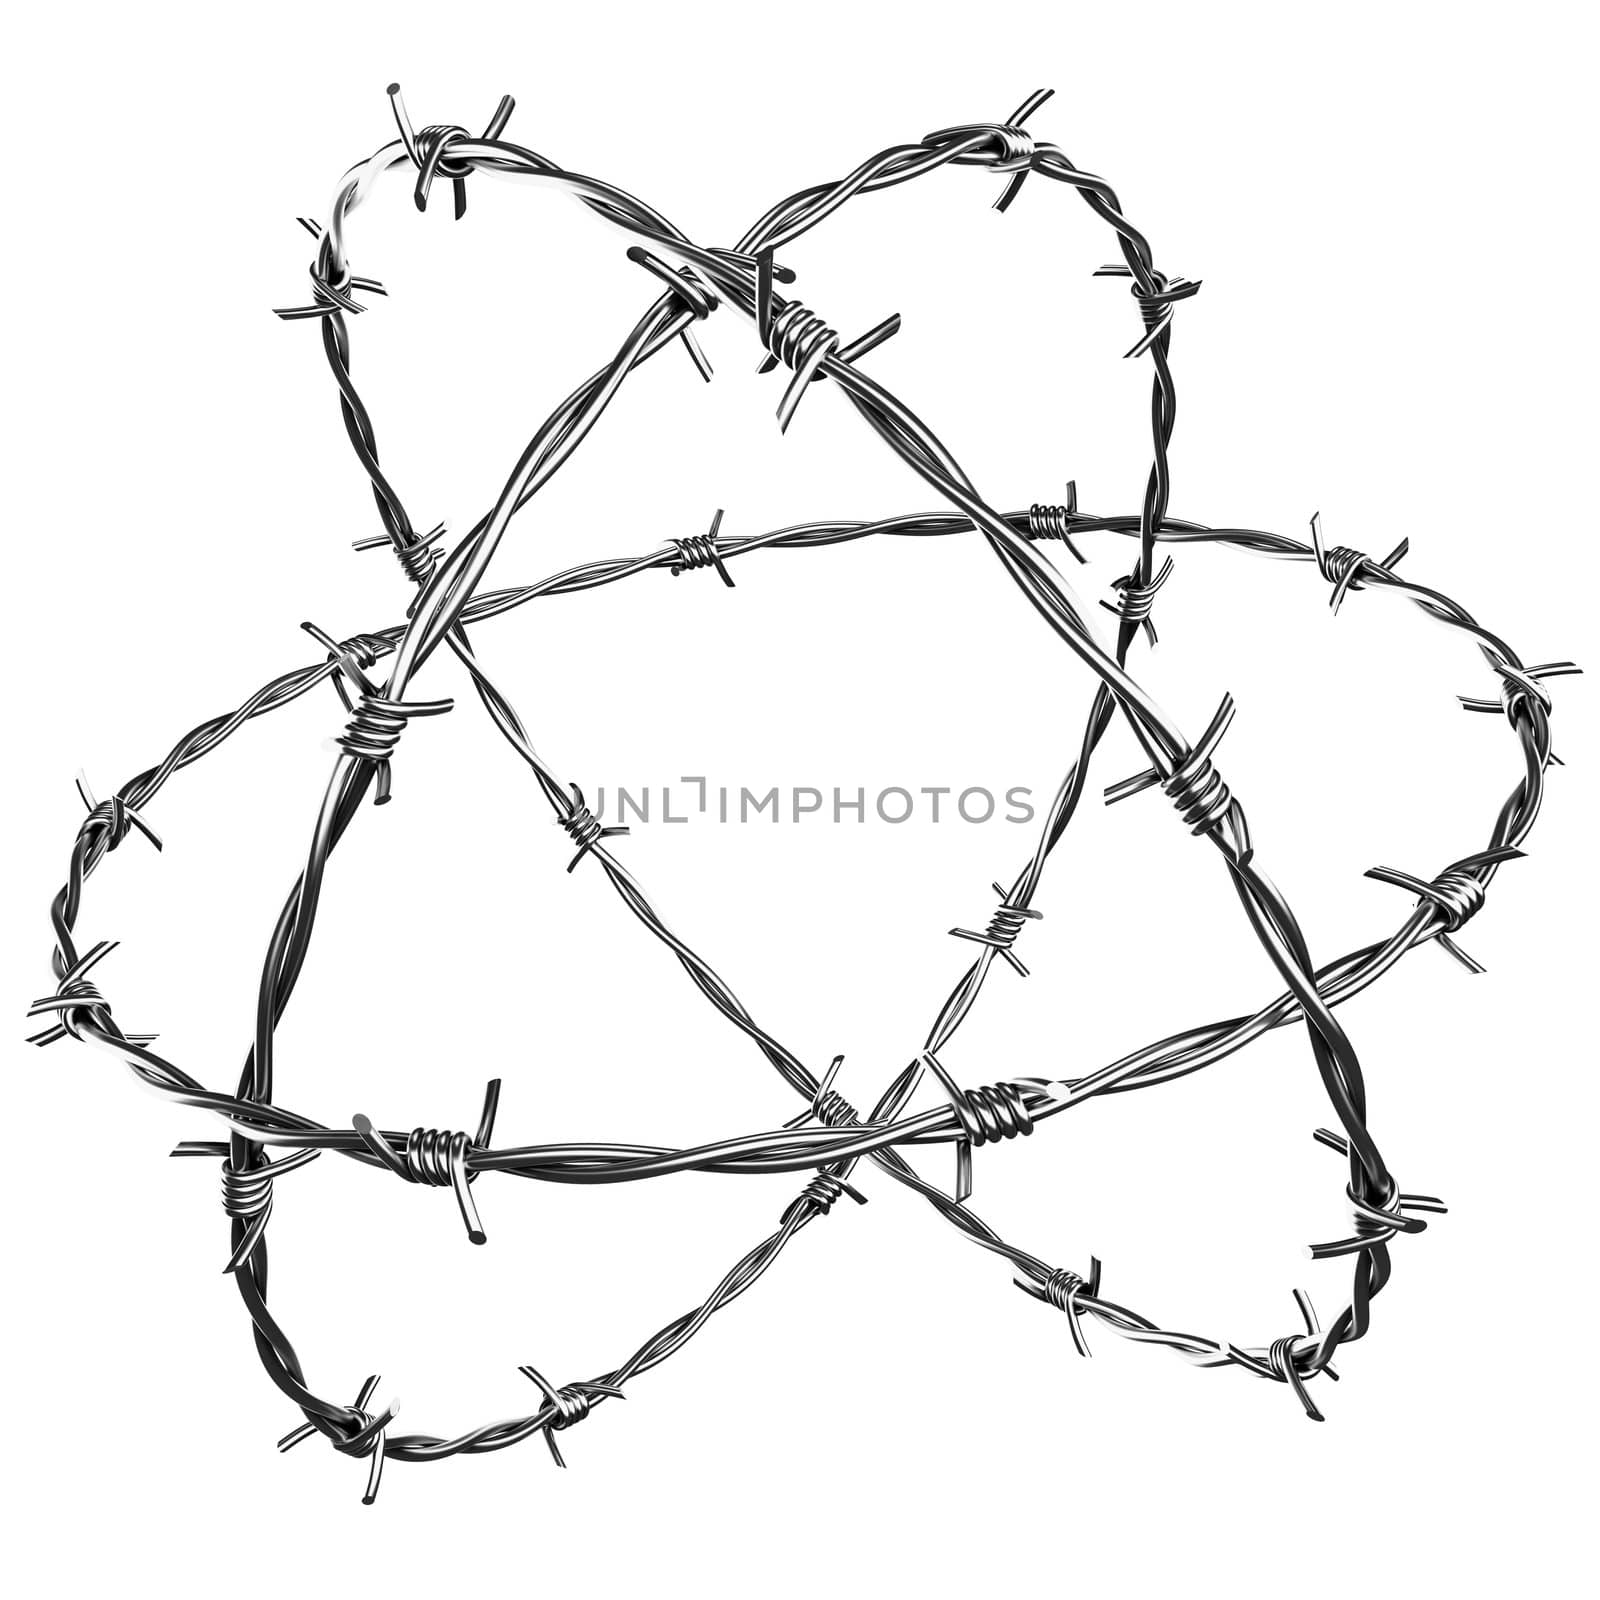 3d rendering of barbed wire, add something in the middle to create a strong concept